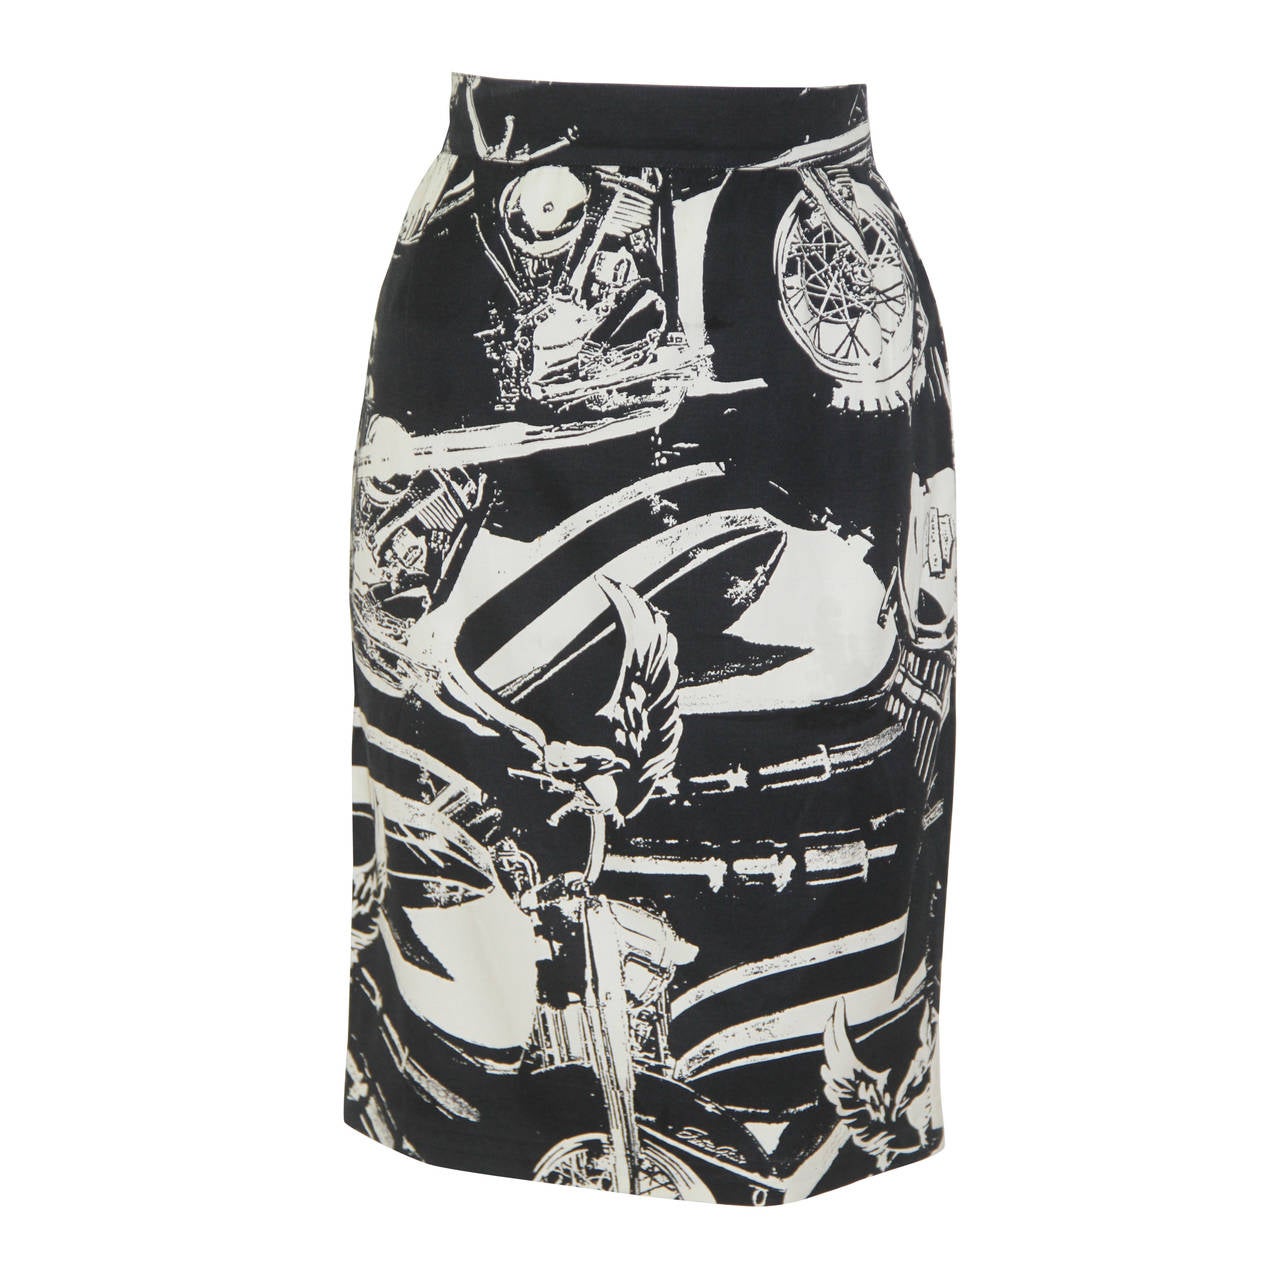 Rare Genny Malisy Motorcycle Print Skirt Spring 1991 For Sale